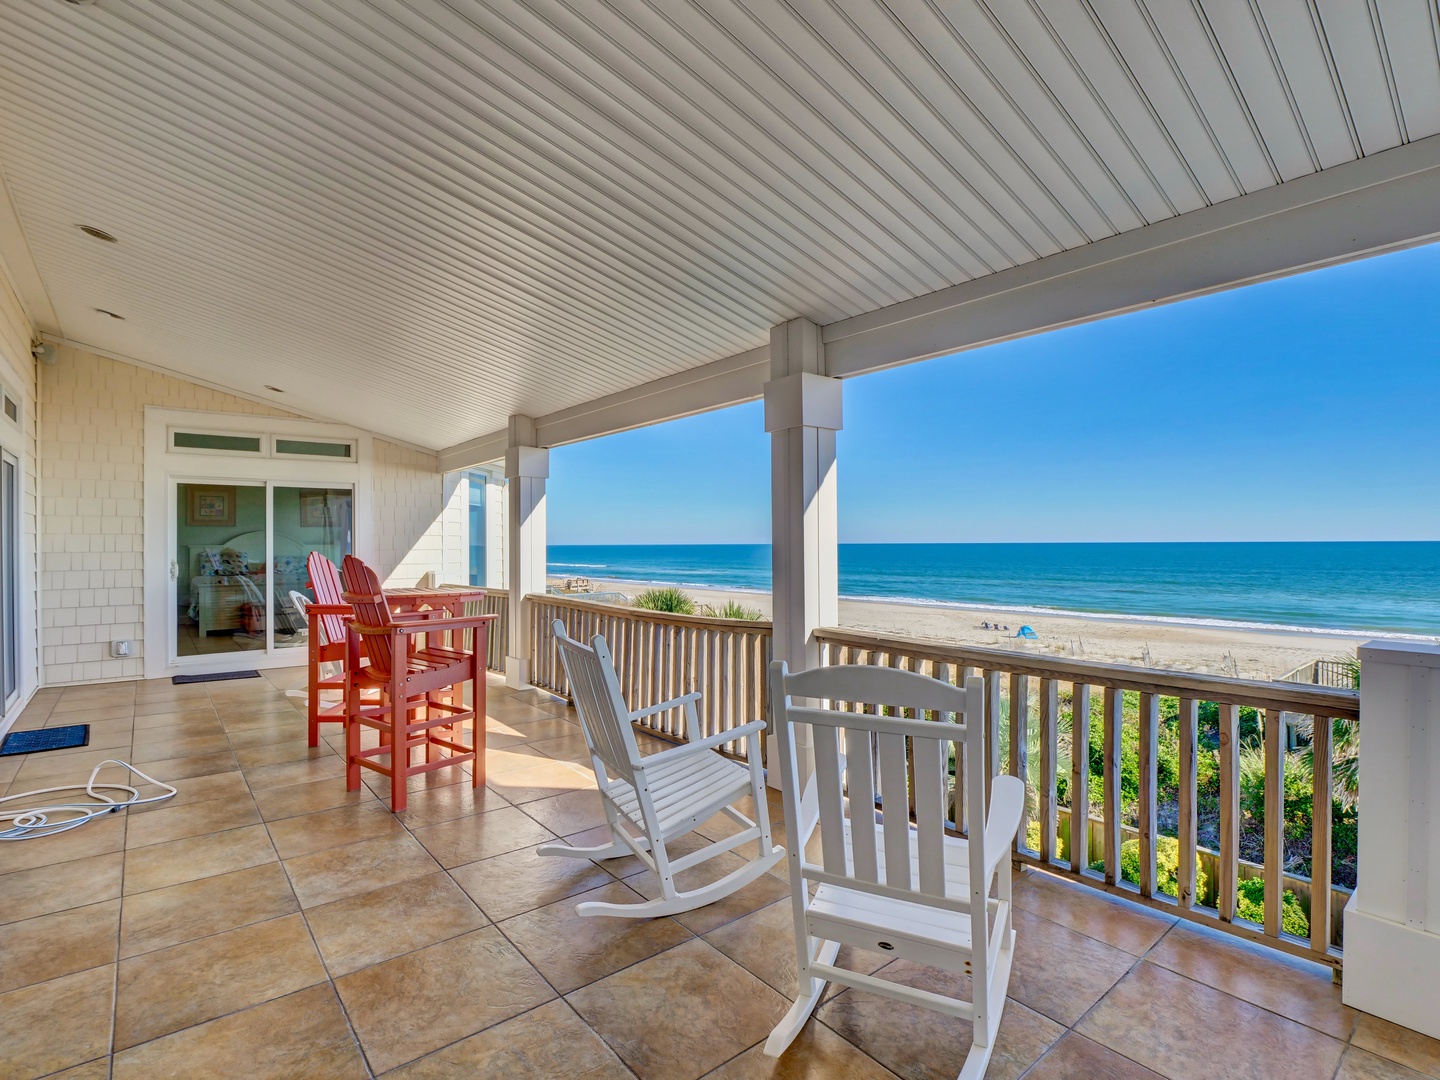 The oceanfront covered porch with fantastic views